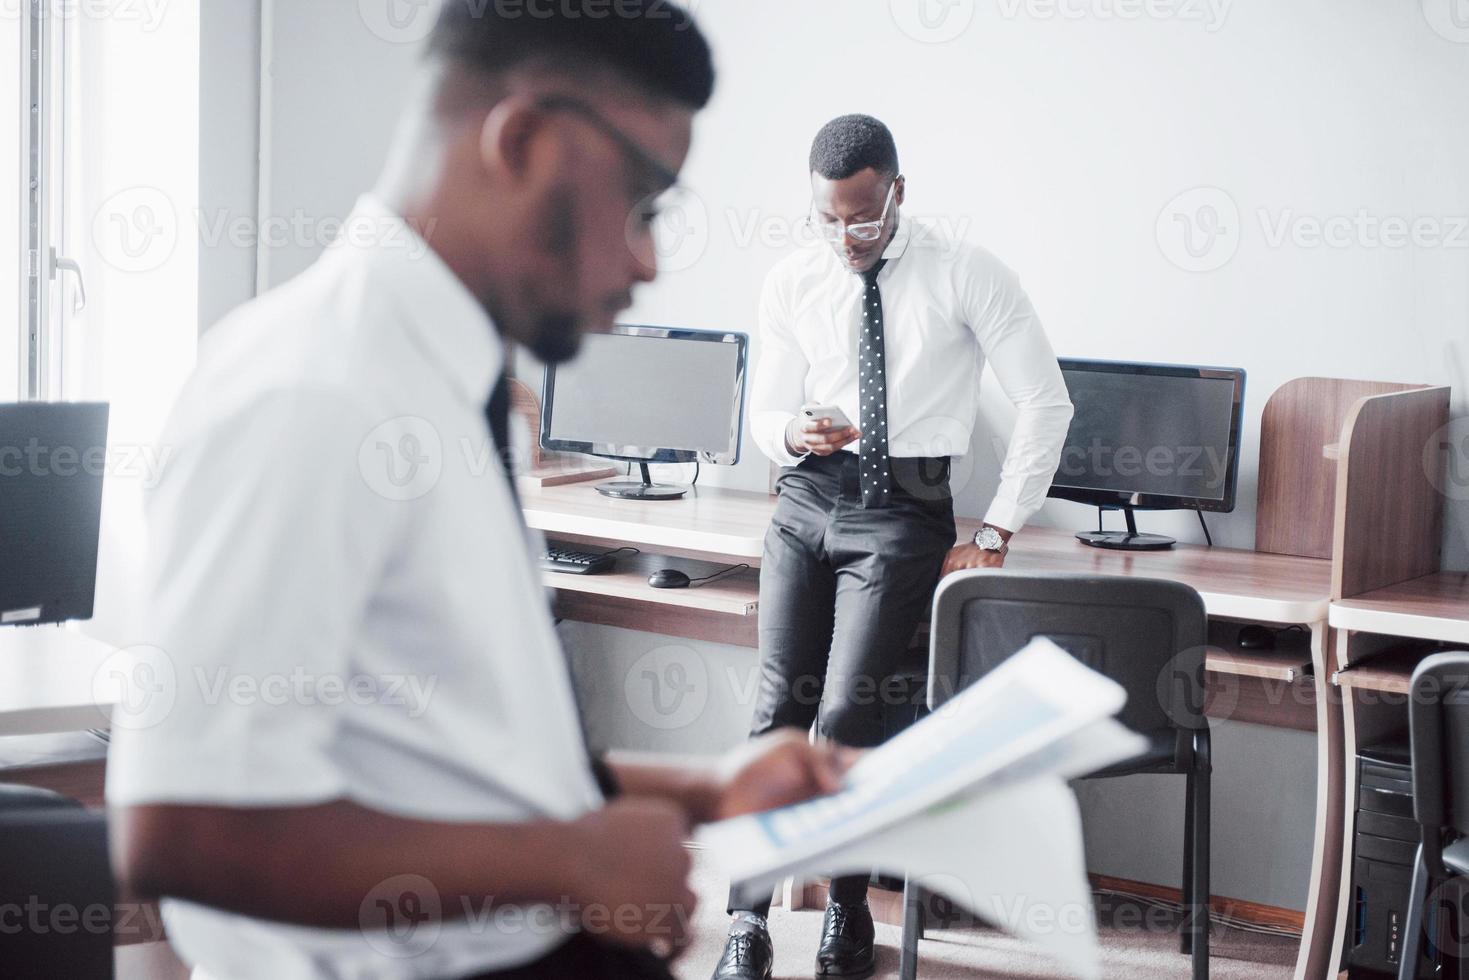 Discussing a project. Two black business people in formalwear discussing something while one of them pointing a paper photo